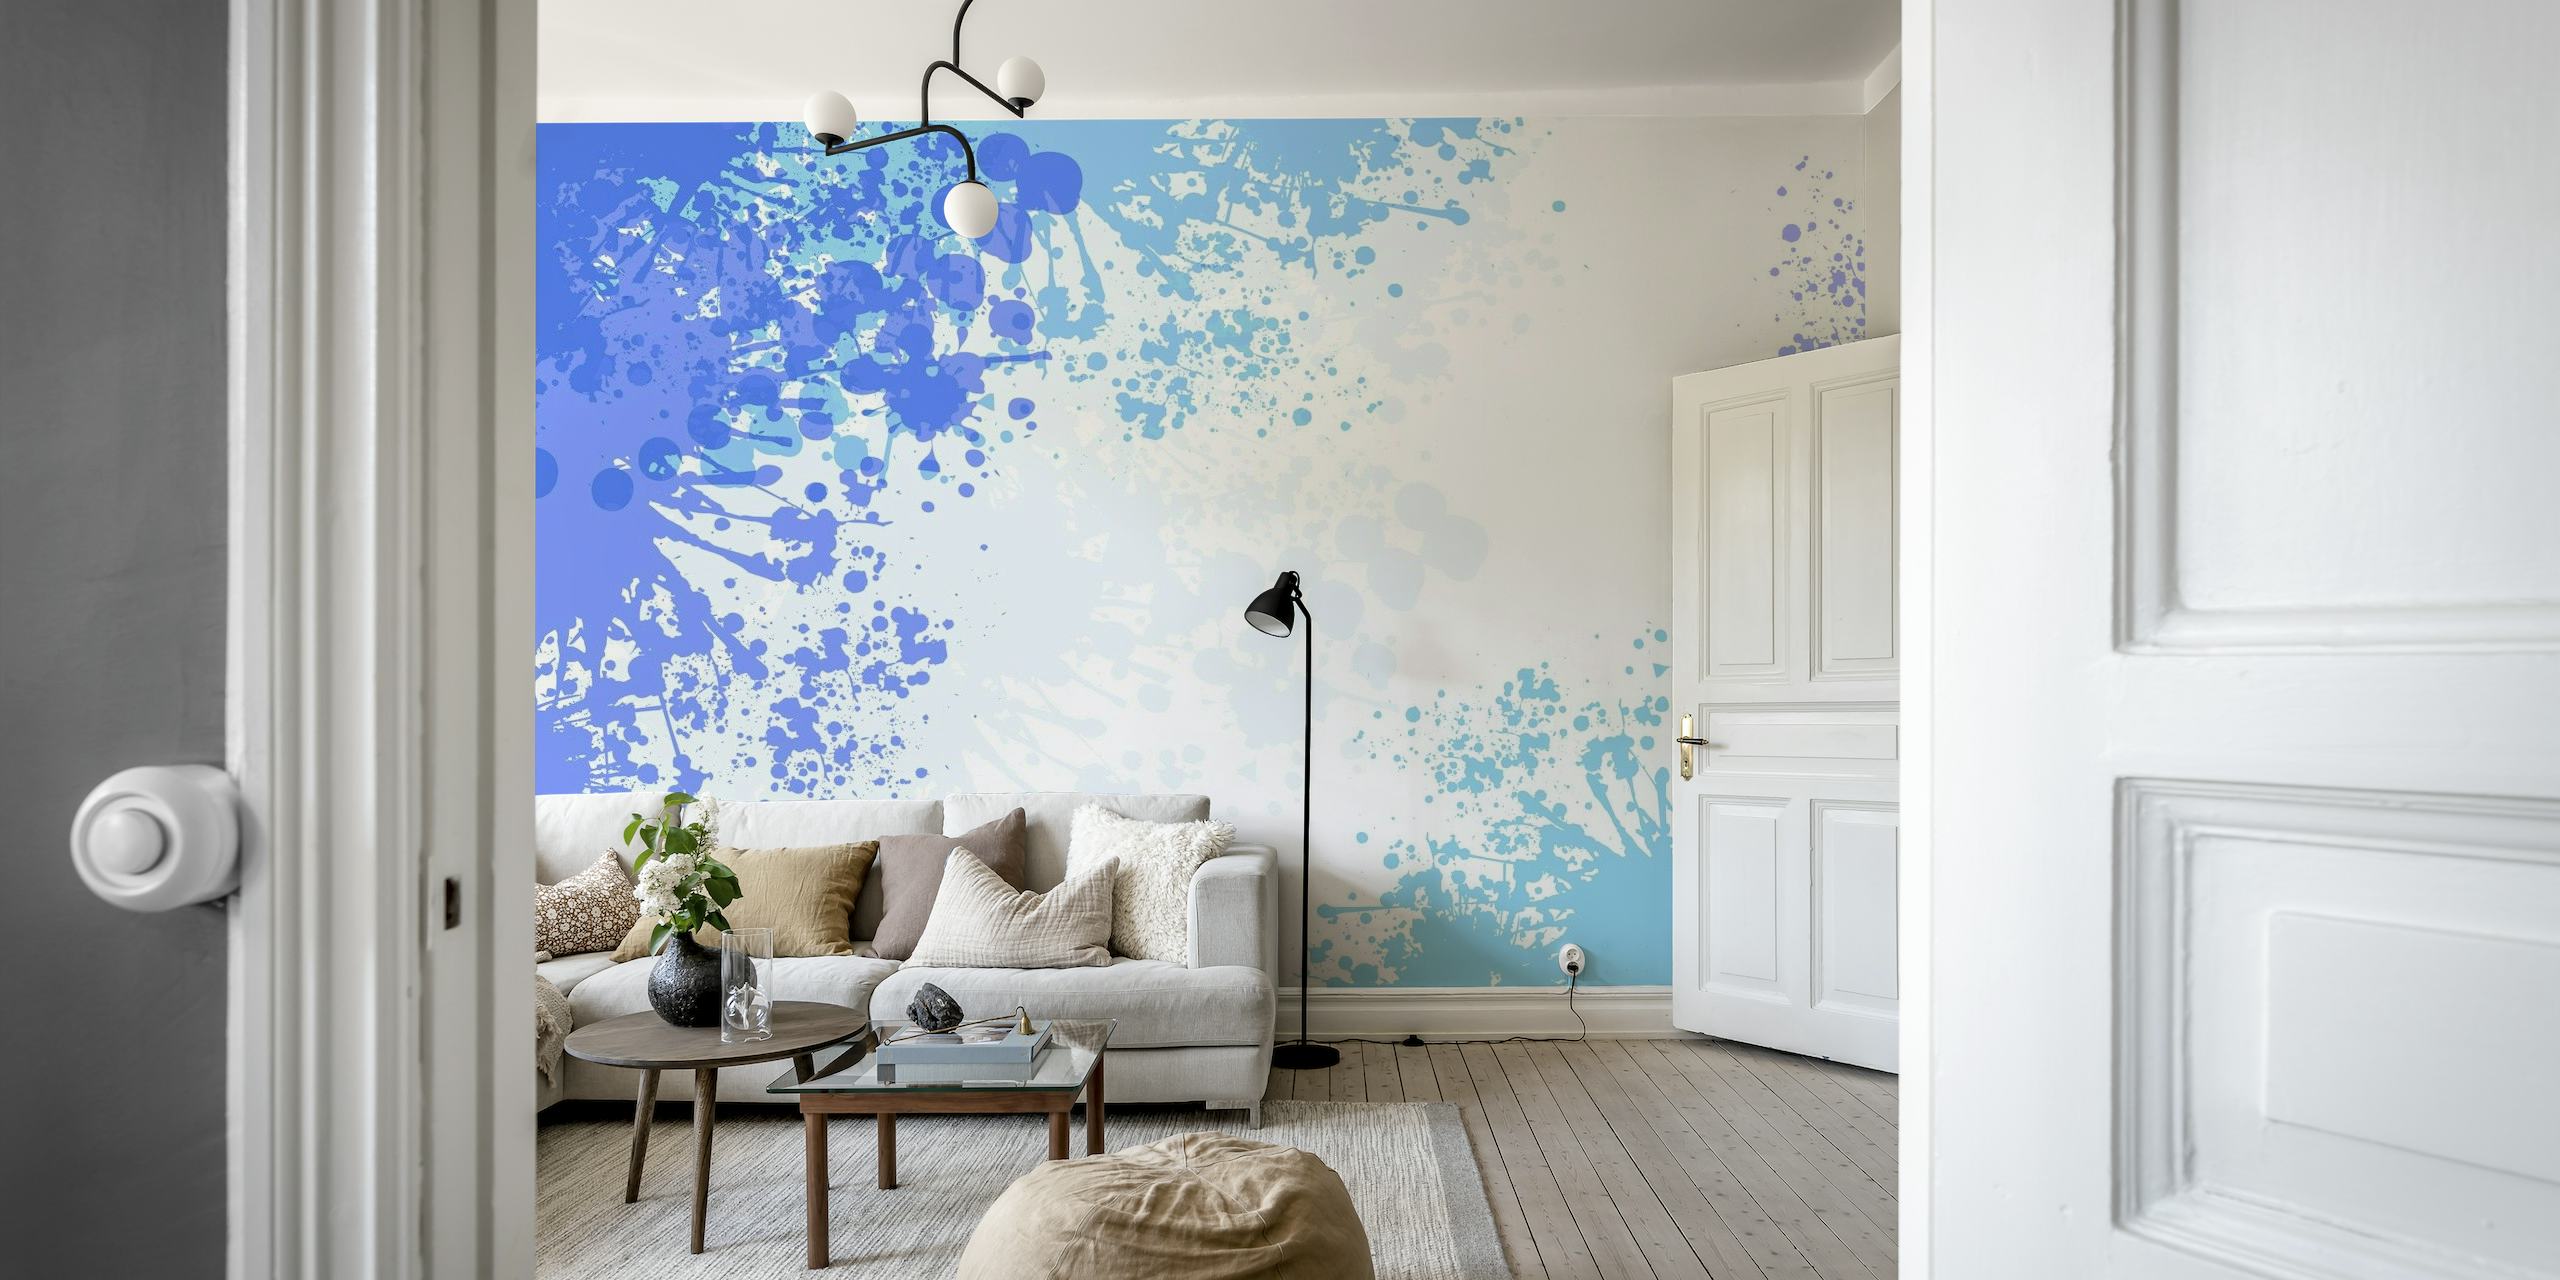 Abstract light blue splash art wall mural with a blend of white and deeper blue drips on a wall.